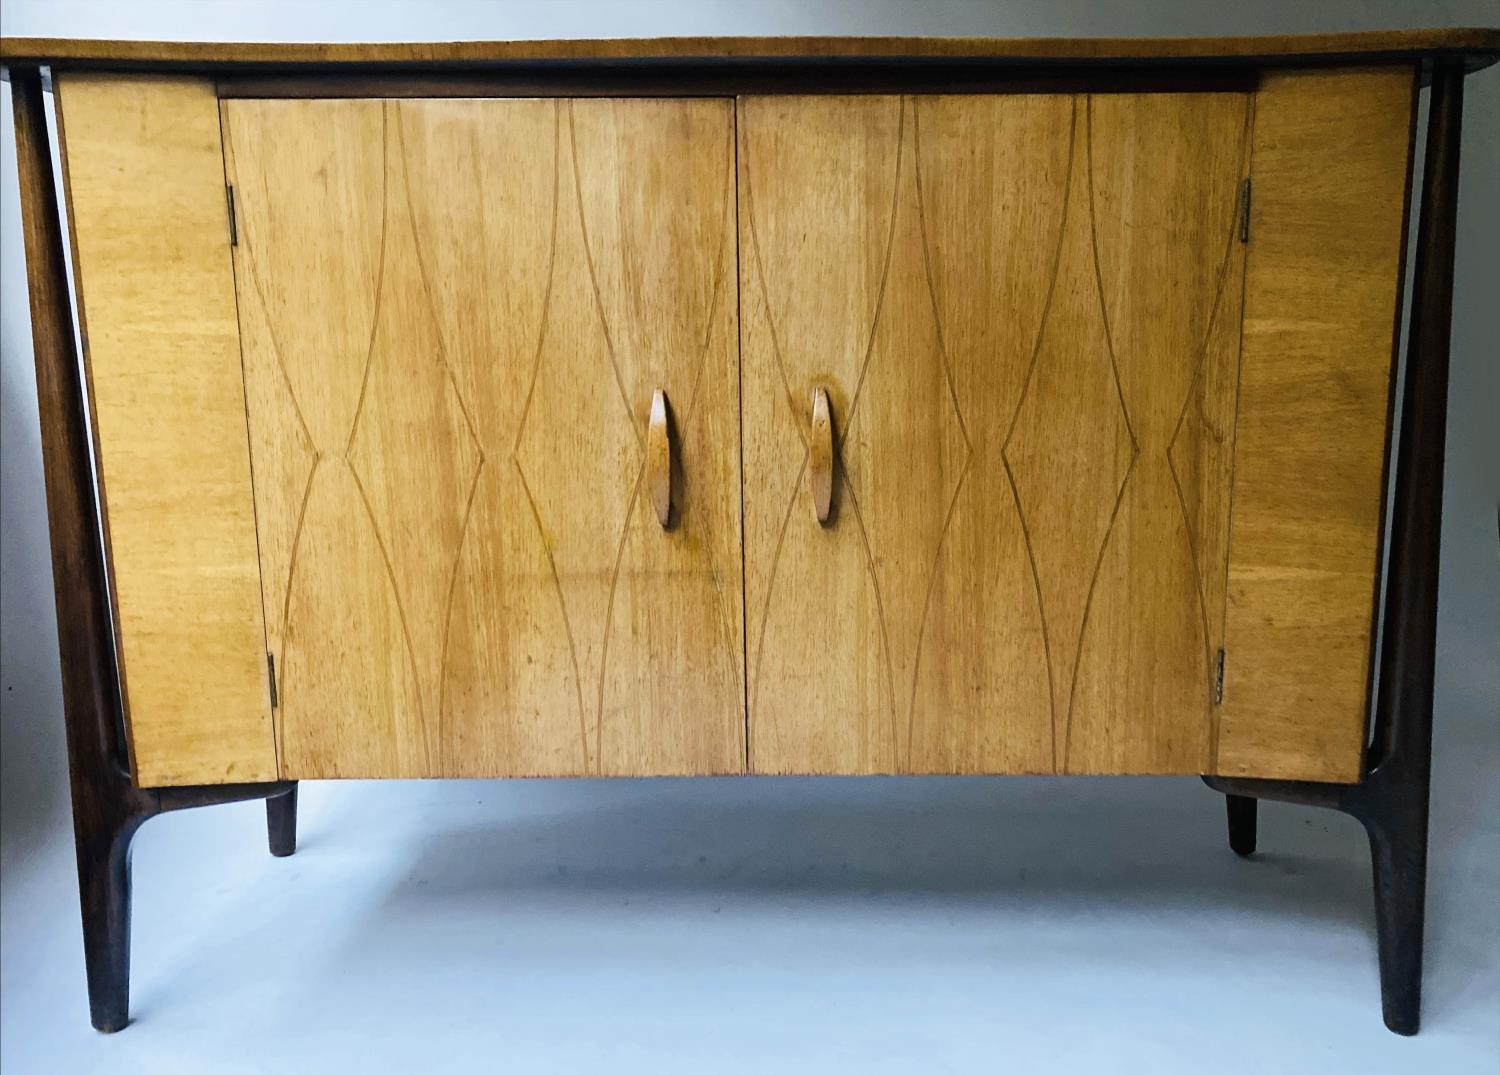 EVEREST SIDEBOARD, 138cm W x 53cm D x 96cm H, 1950's walnut, with two helix inlaid doors, maple